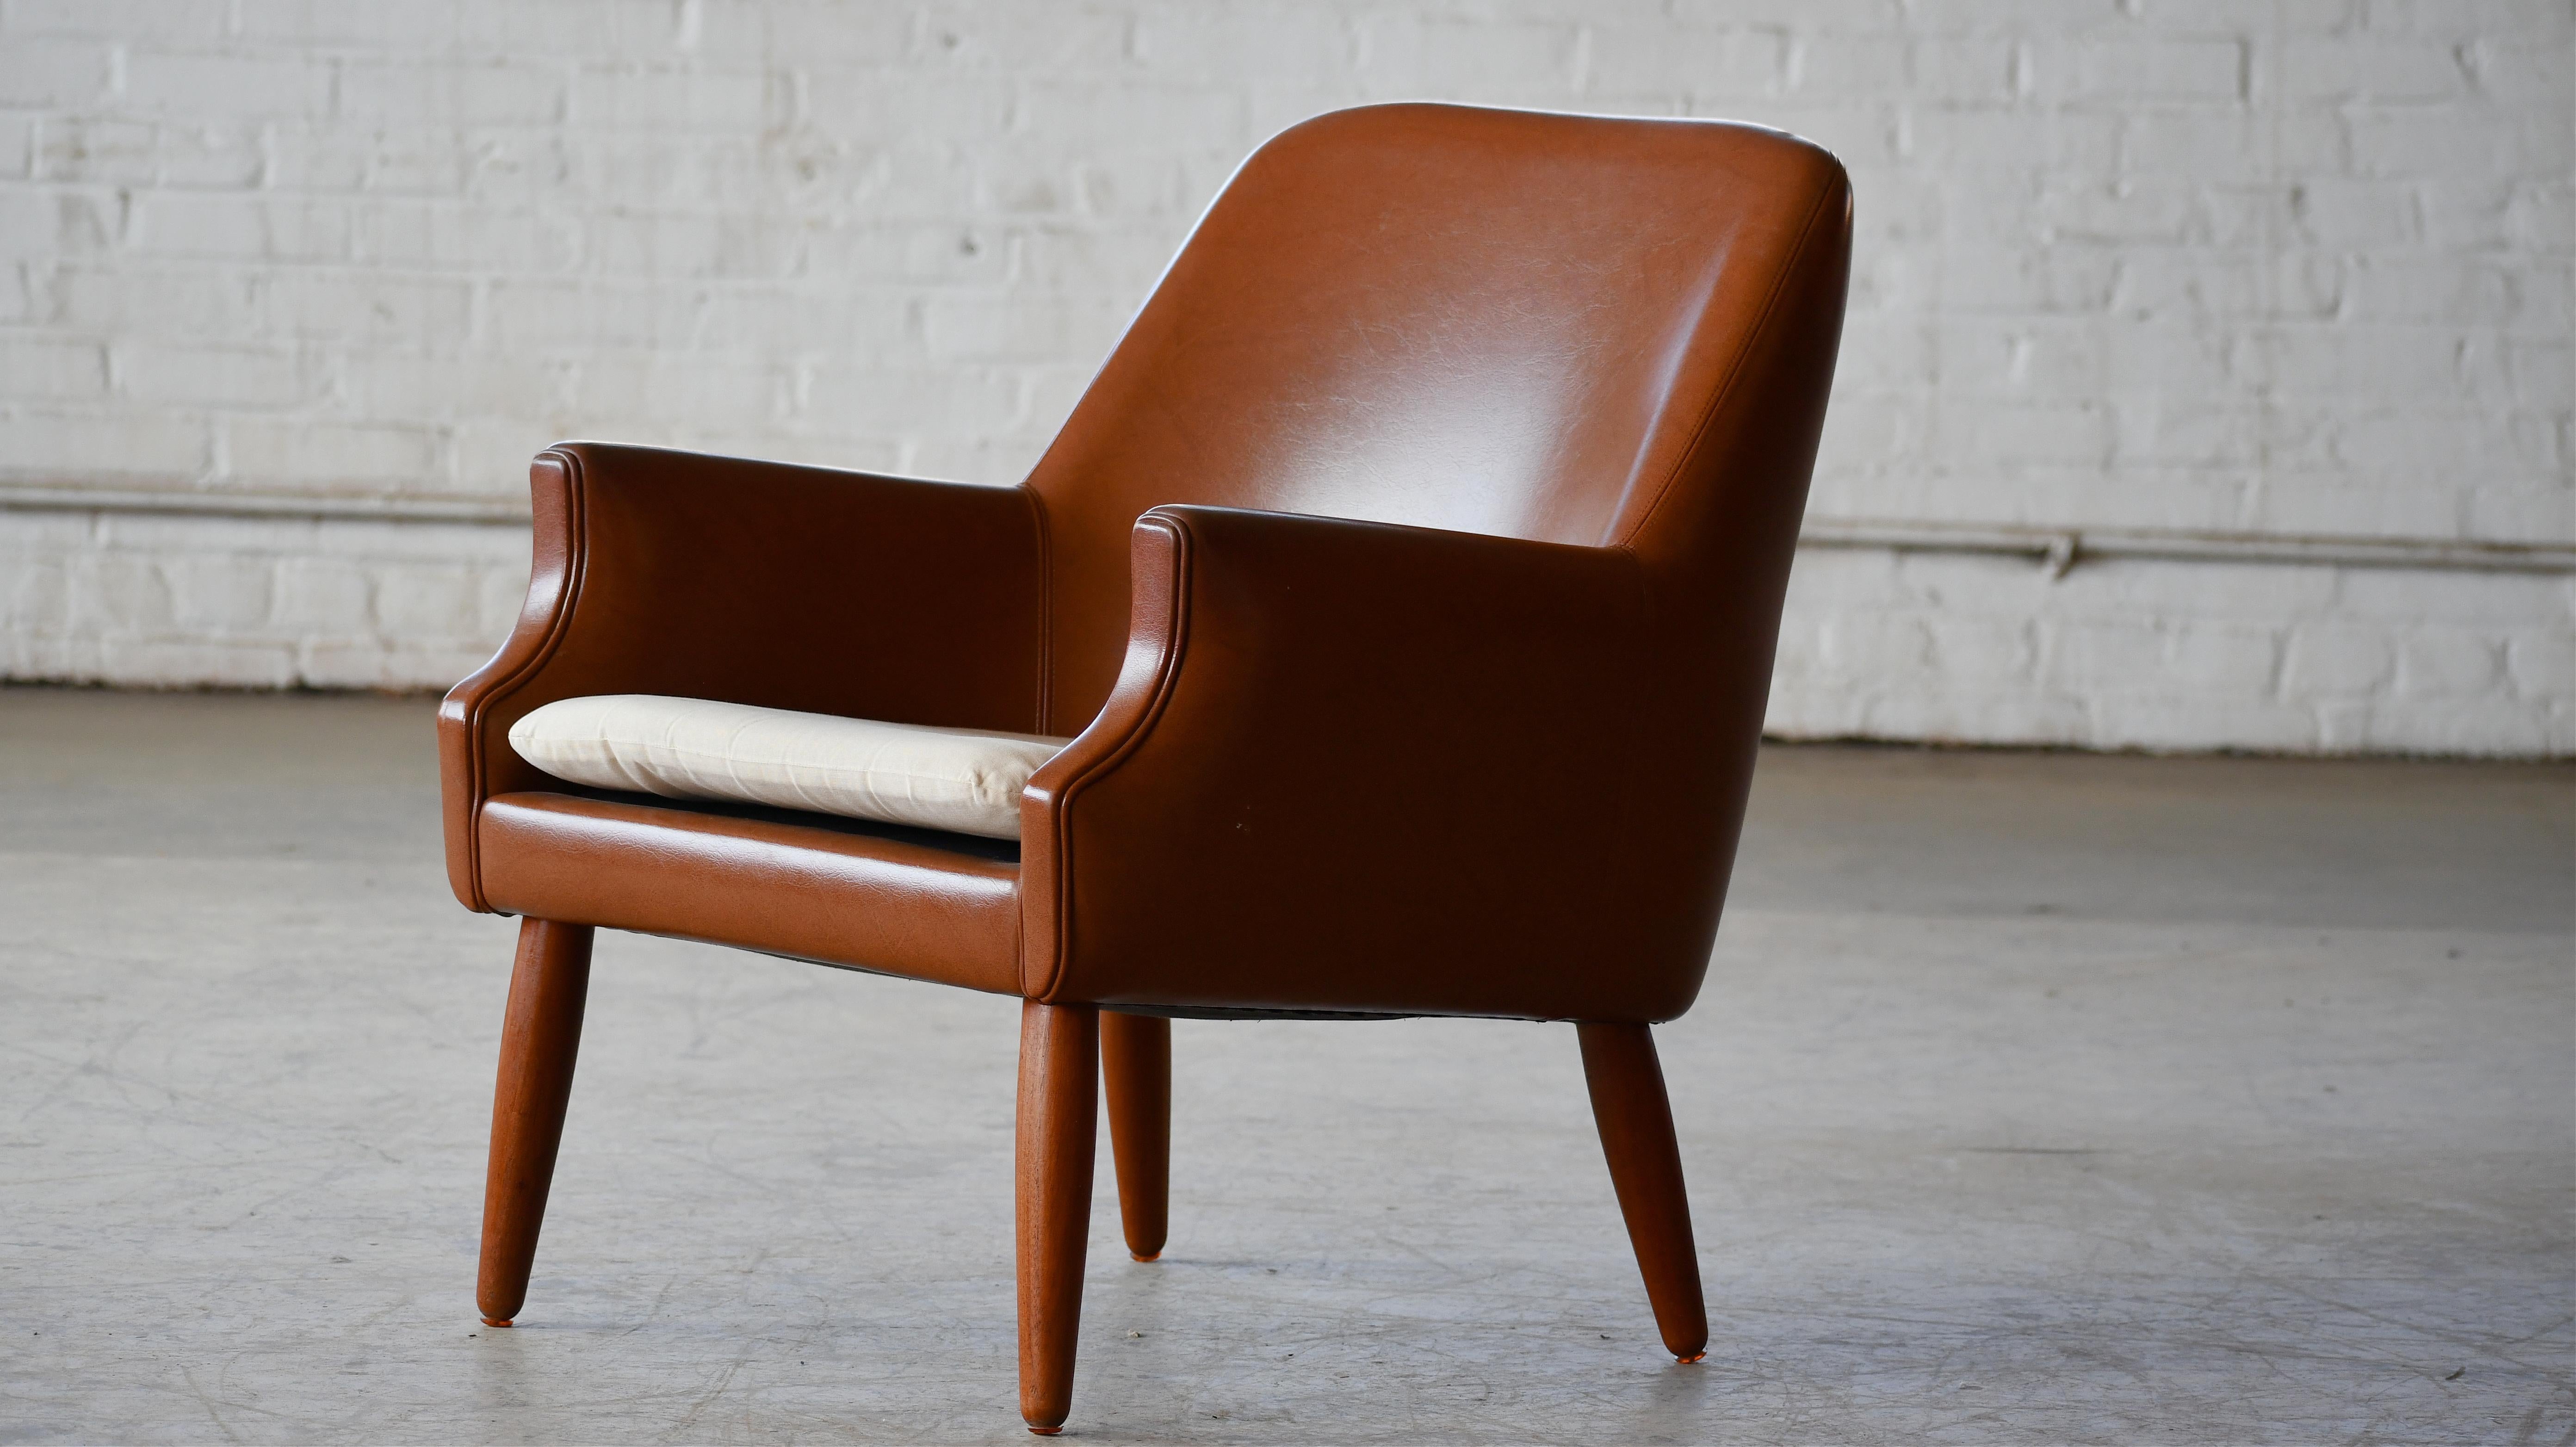 Mid-20th Century Danish Midcentury Space Age Lounge Chair in Teak and Naugahyde For Sale